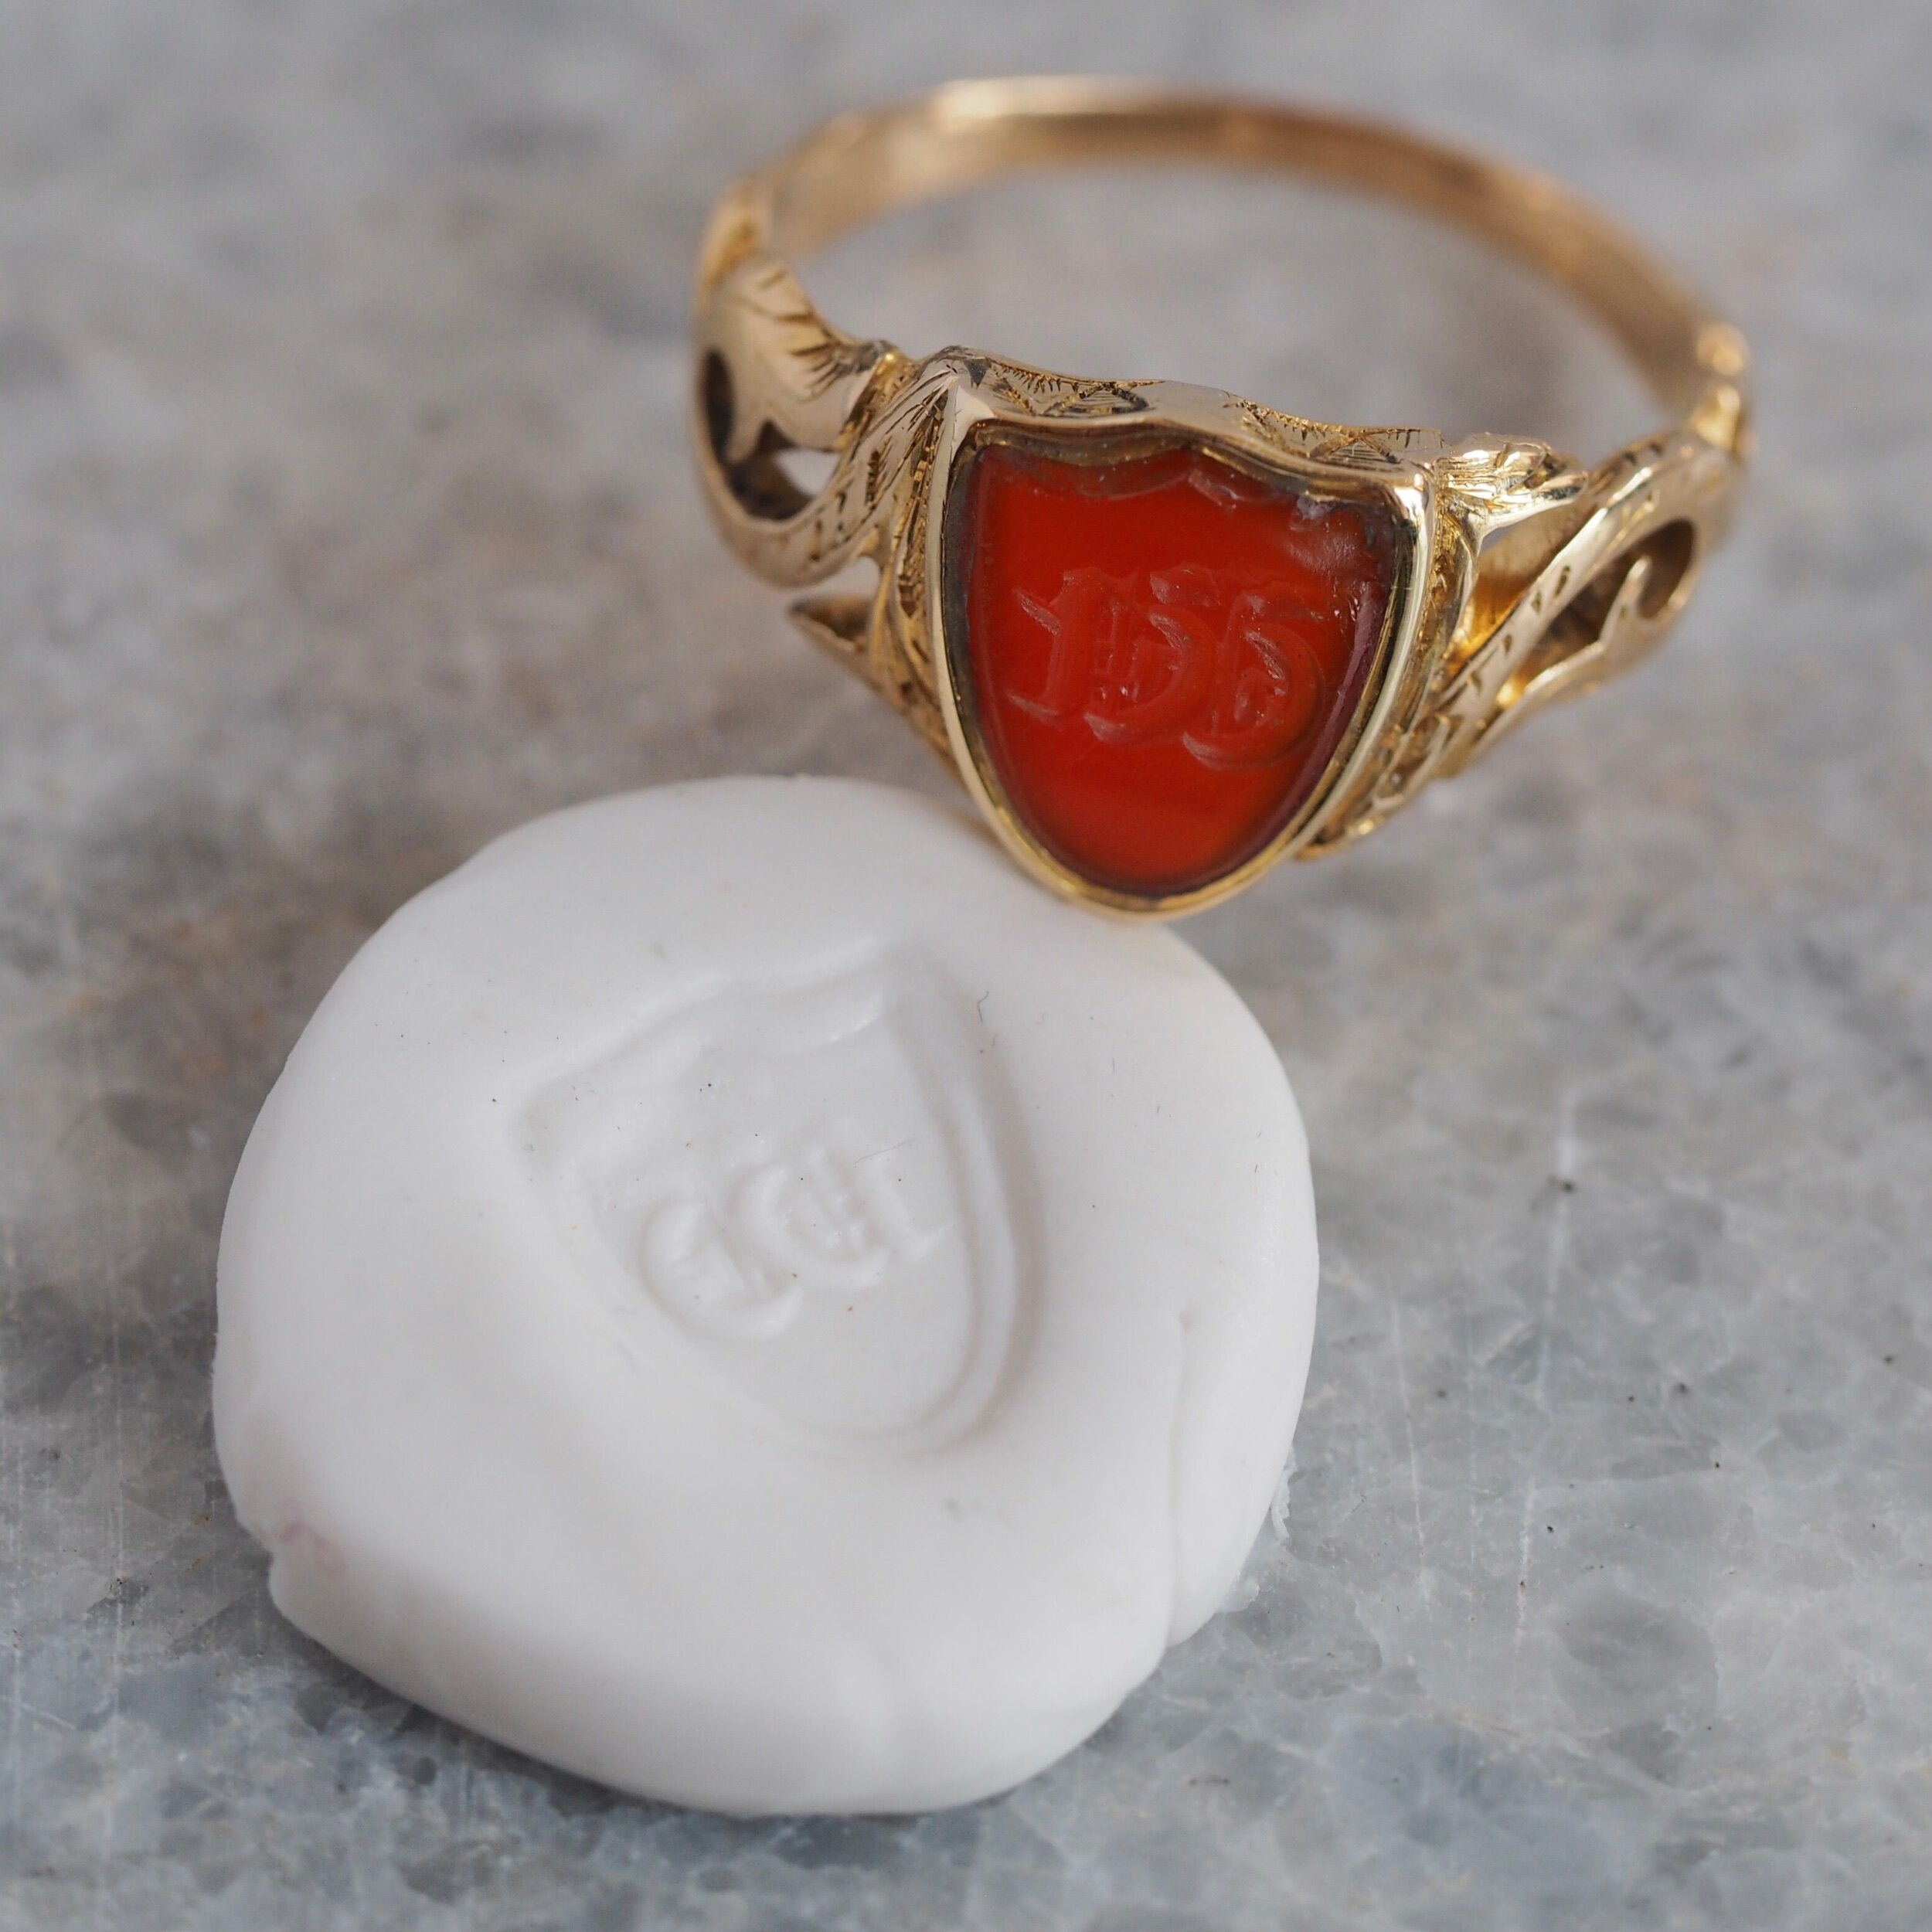 Antique Early Victorian 18k Gold Carnelian Intaglio Shield Signet Ring